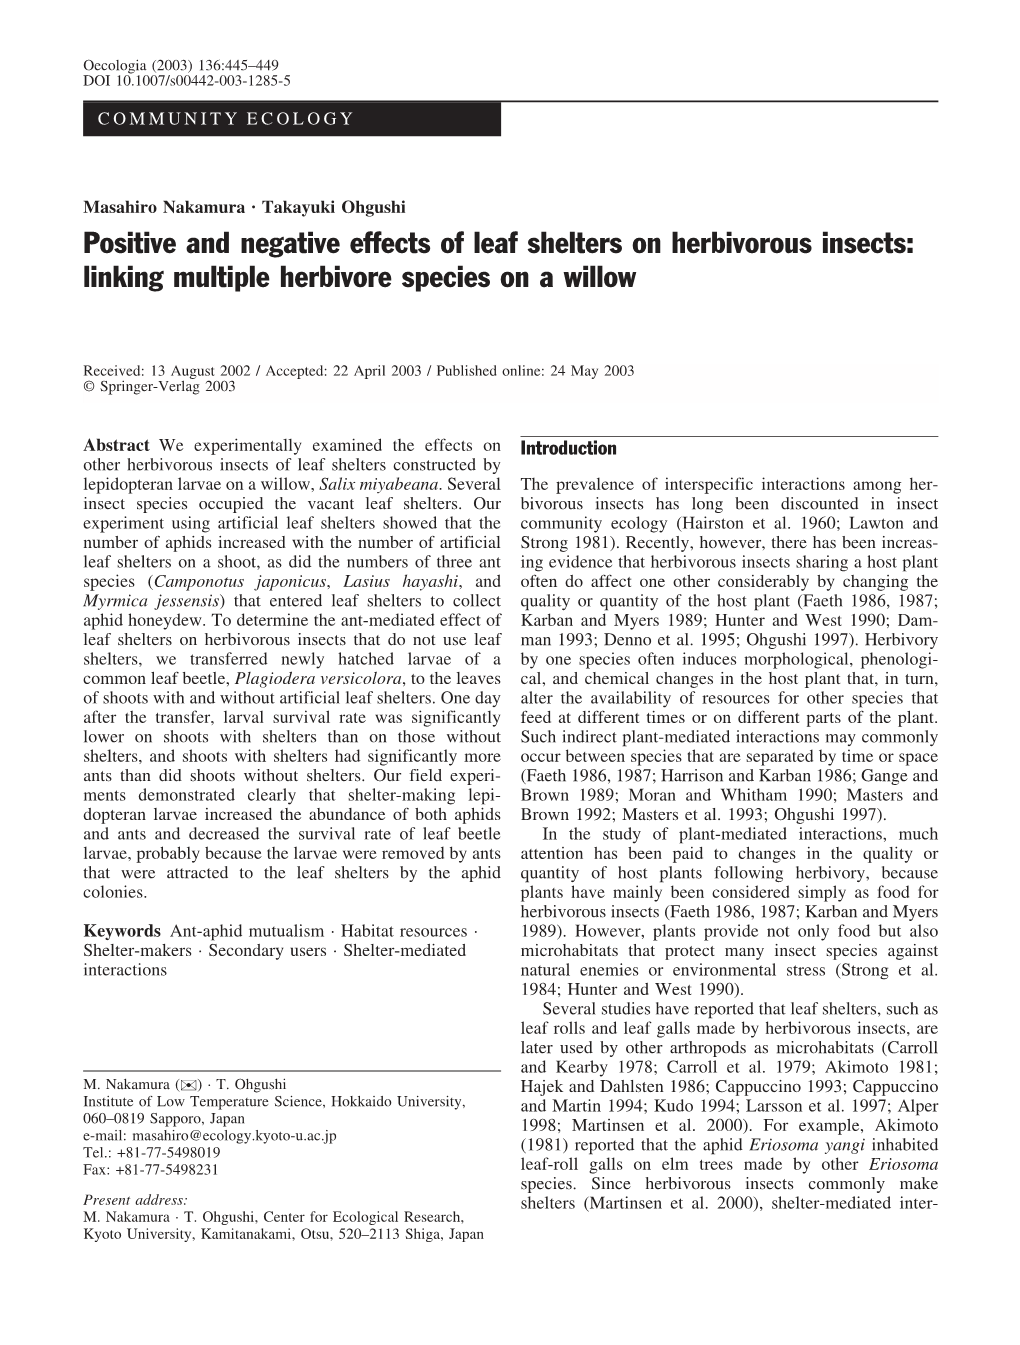 Positive and Negative Effects of Leaf Shelters on Herbivorous Insects: Linking Multiple Herbivore Species on a Willow